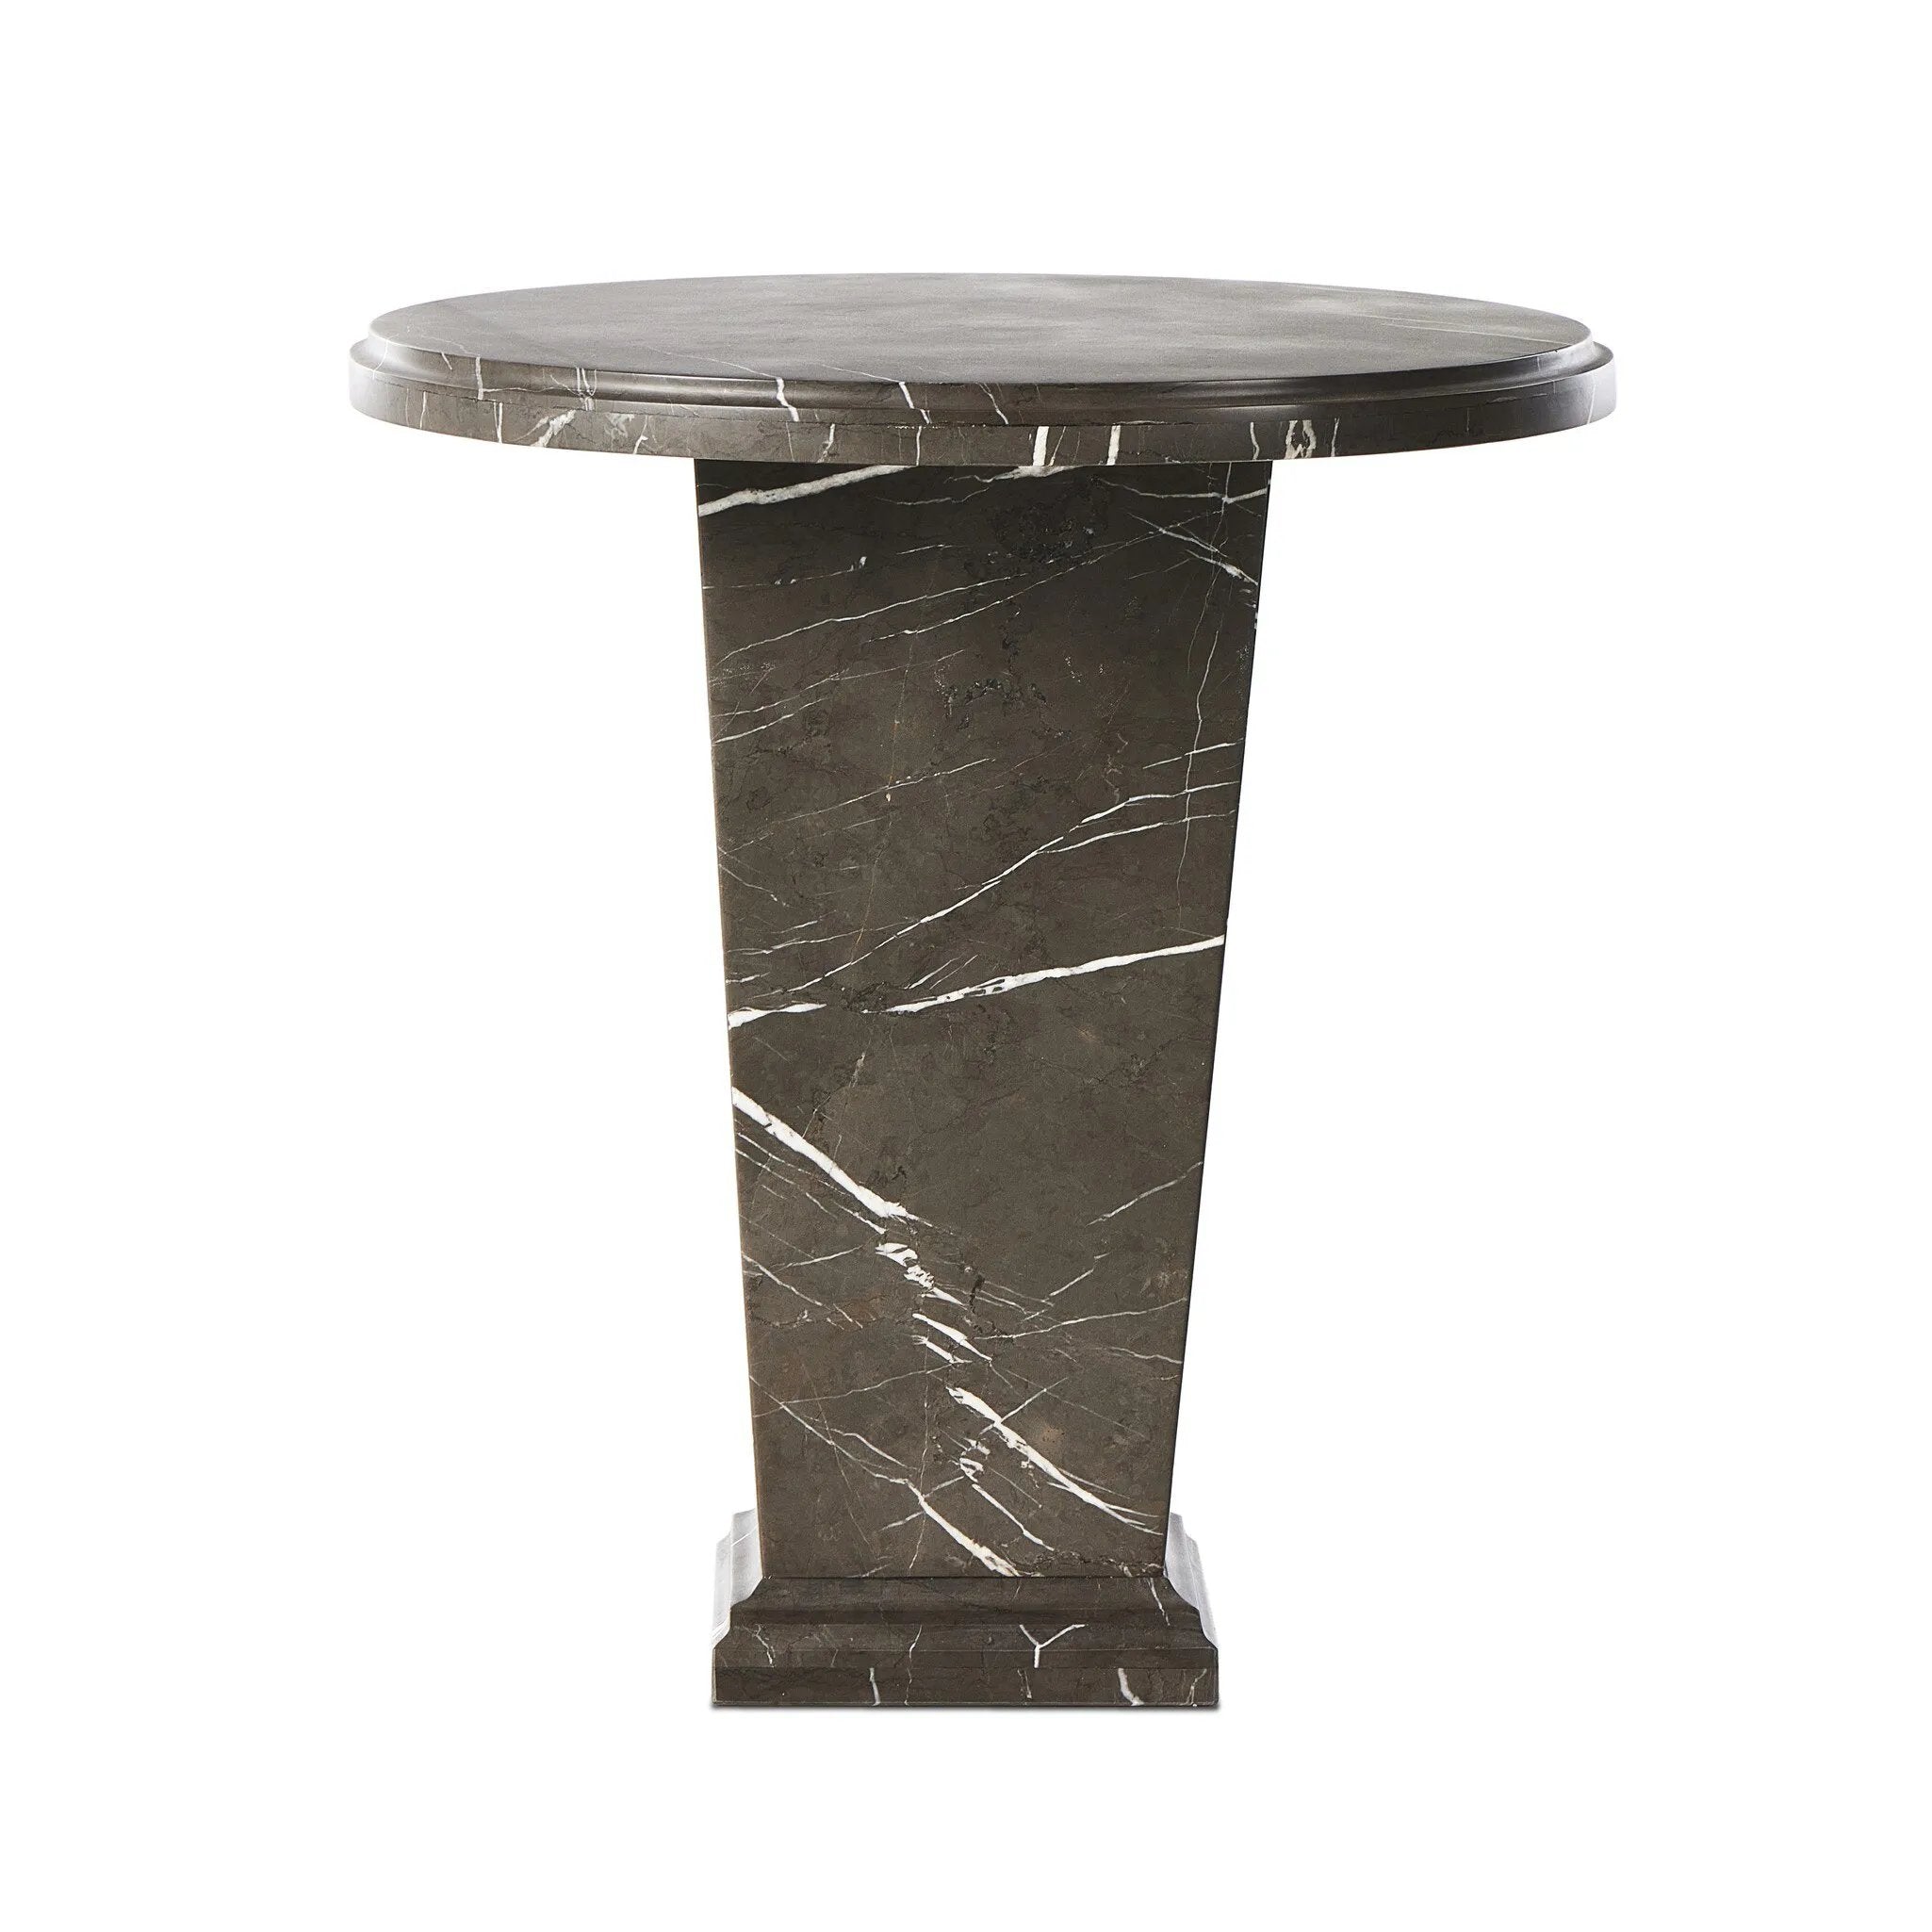 Inspired by Roman columns, a versatile end table of grey Italian marble works a sophisticated touch into any room.Collection: Elemen Amethyst Home provides interior design, new home construction design consulting, vintage area rugs, and lighting in the Dallas metro area.